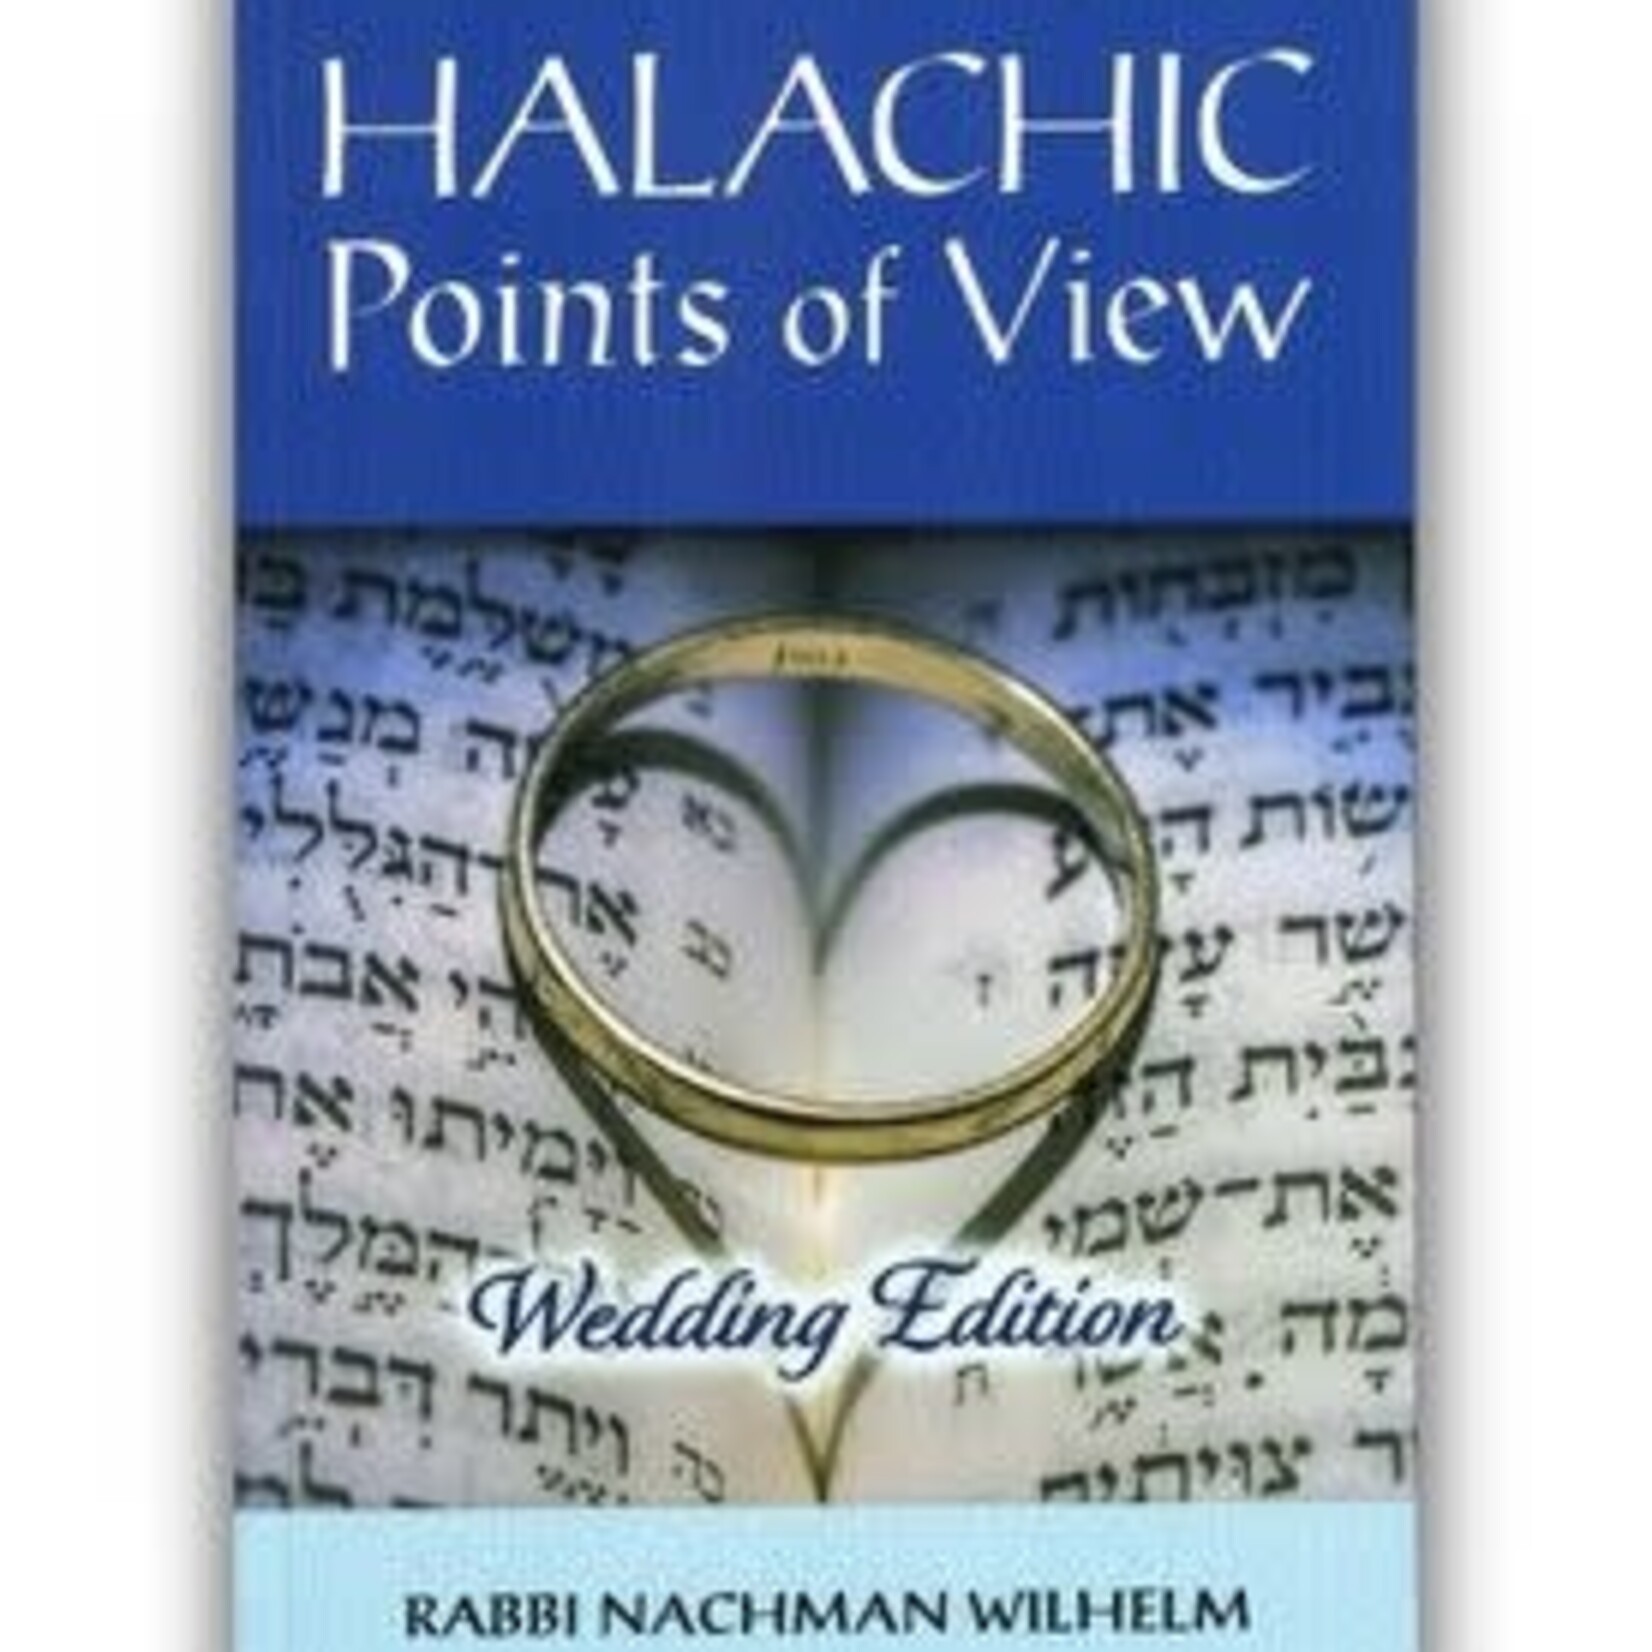 Halachic Points of View-Wedding Edition